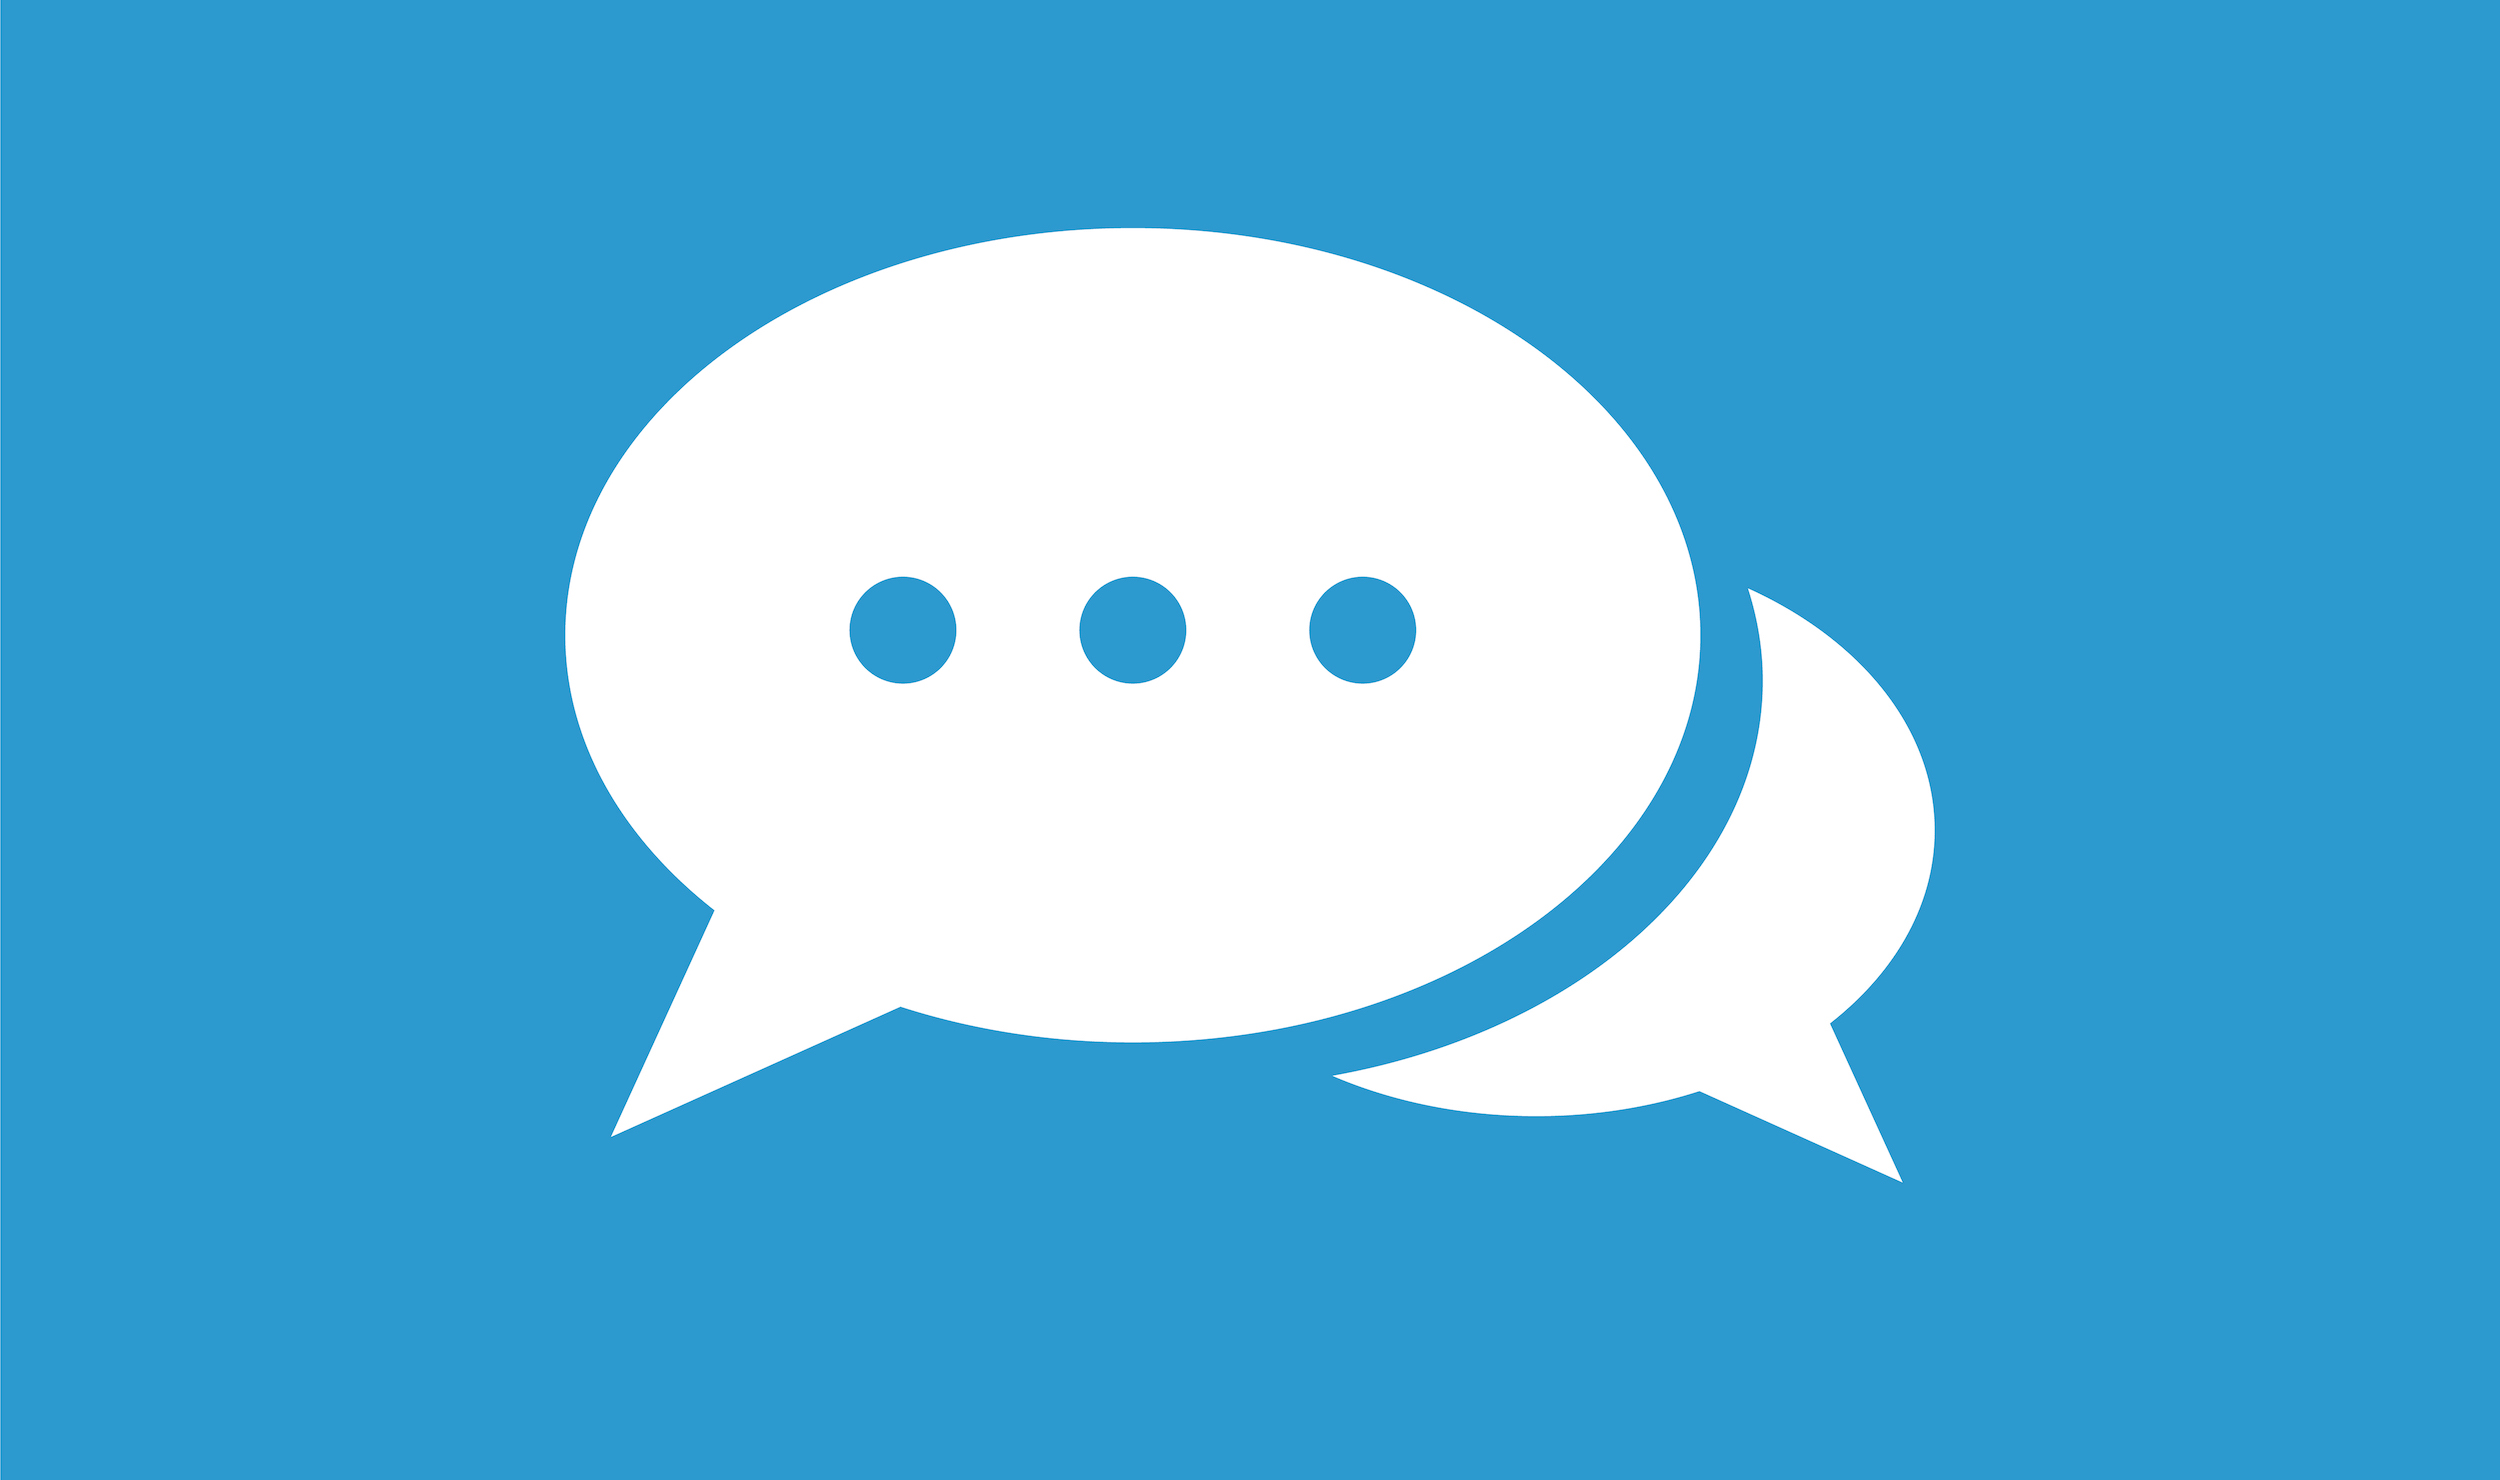 Twitter And Sling TV Venture Into Conversational Interfaces - IPG Media Lab